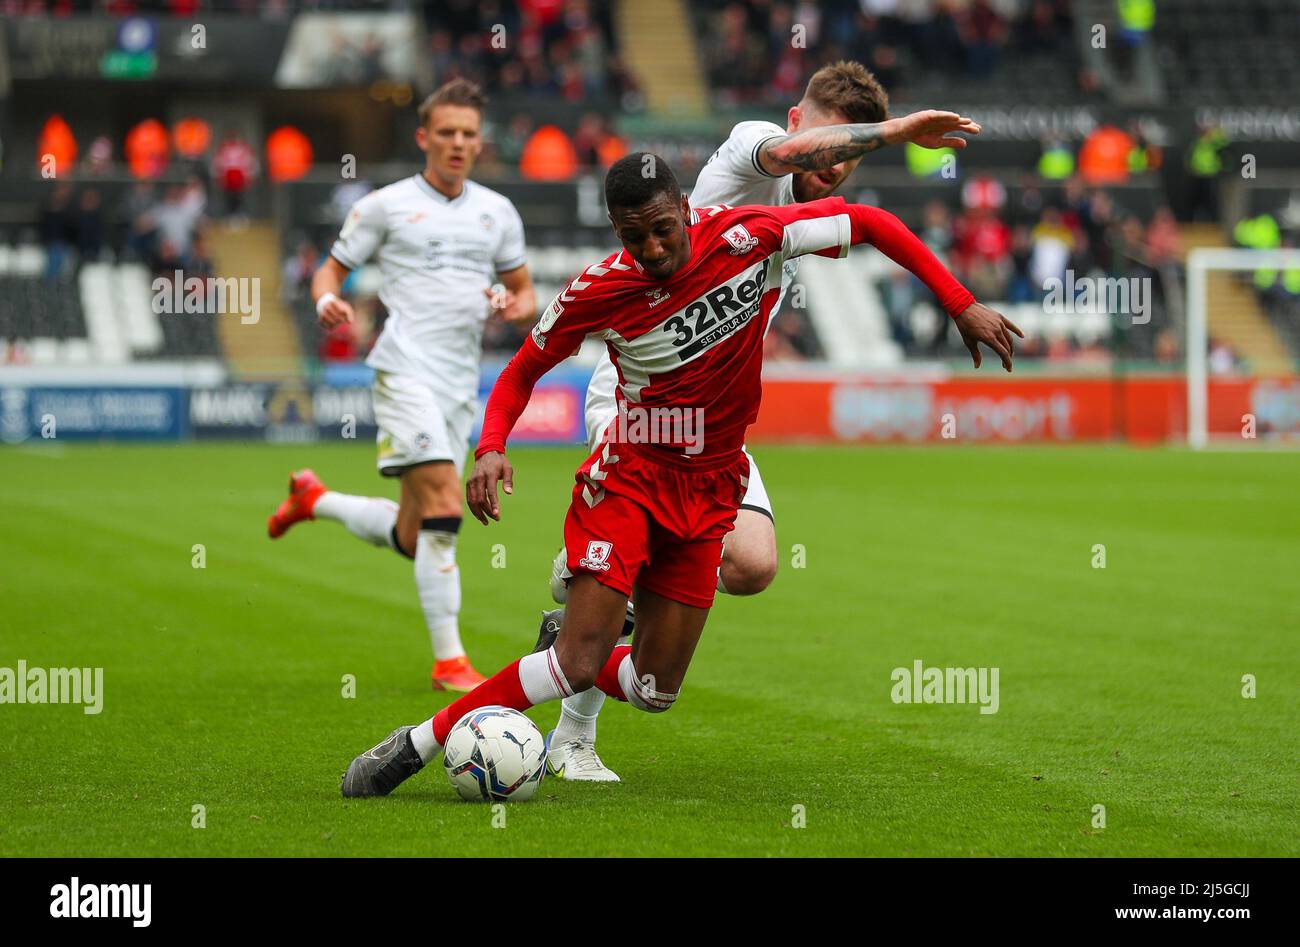 23rd April 2022,  Swansea.com stadium, Swansea, Wales; Championship football, Swansea versus Middlesbrough; Isaiah Jones of Middlesbrough and Ryan Manning of Swansea City jostle for possession Stock Photo